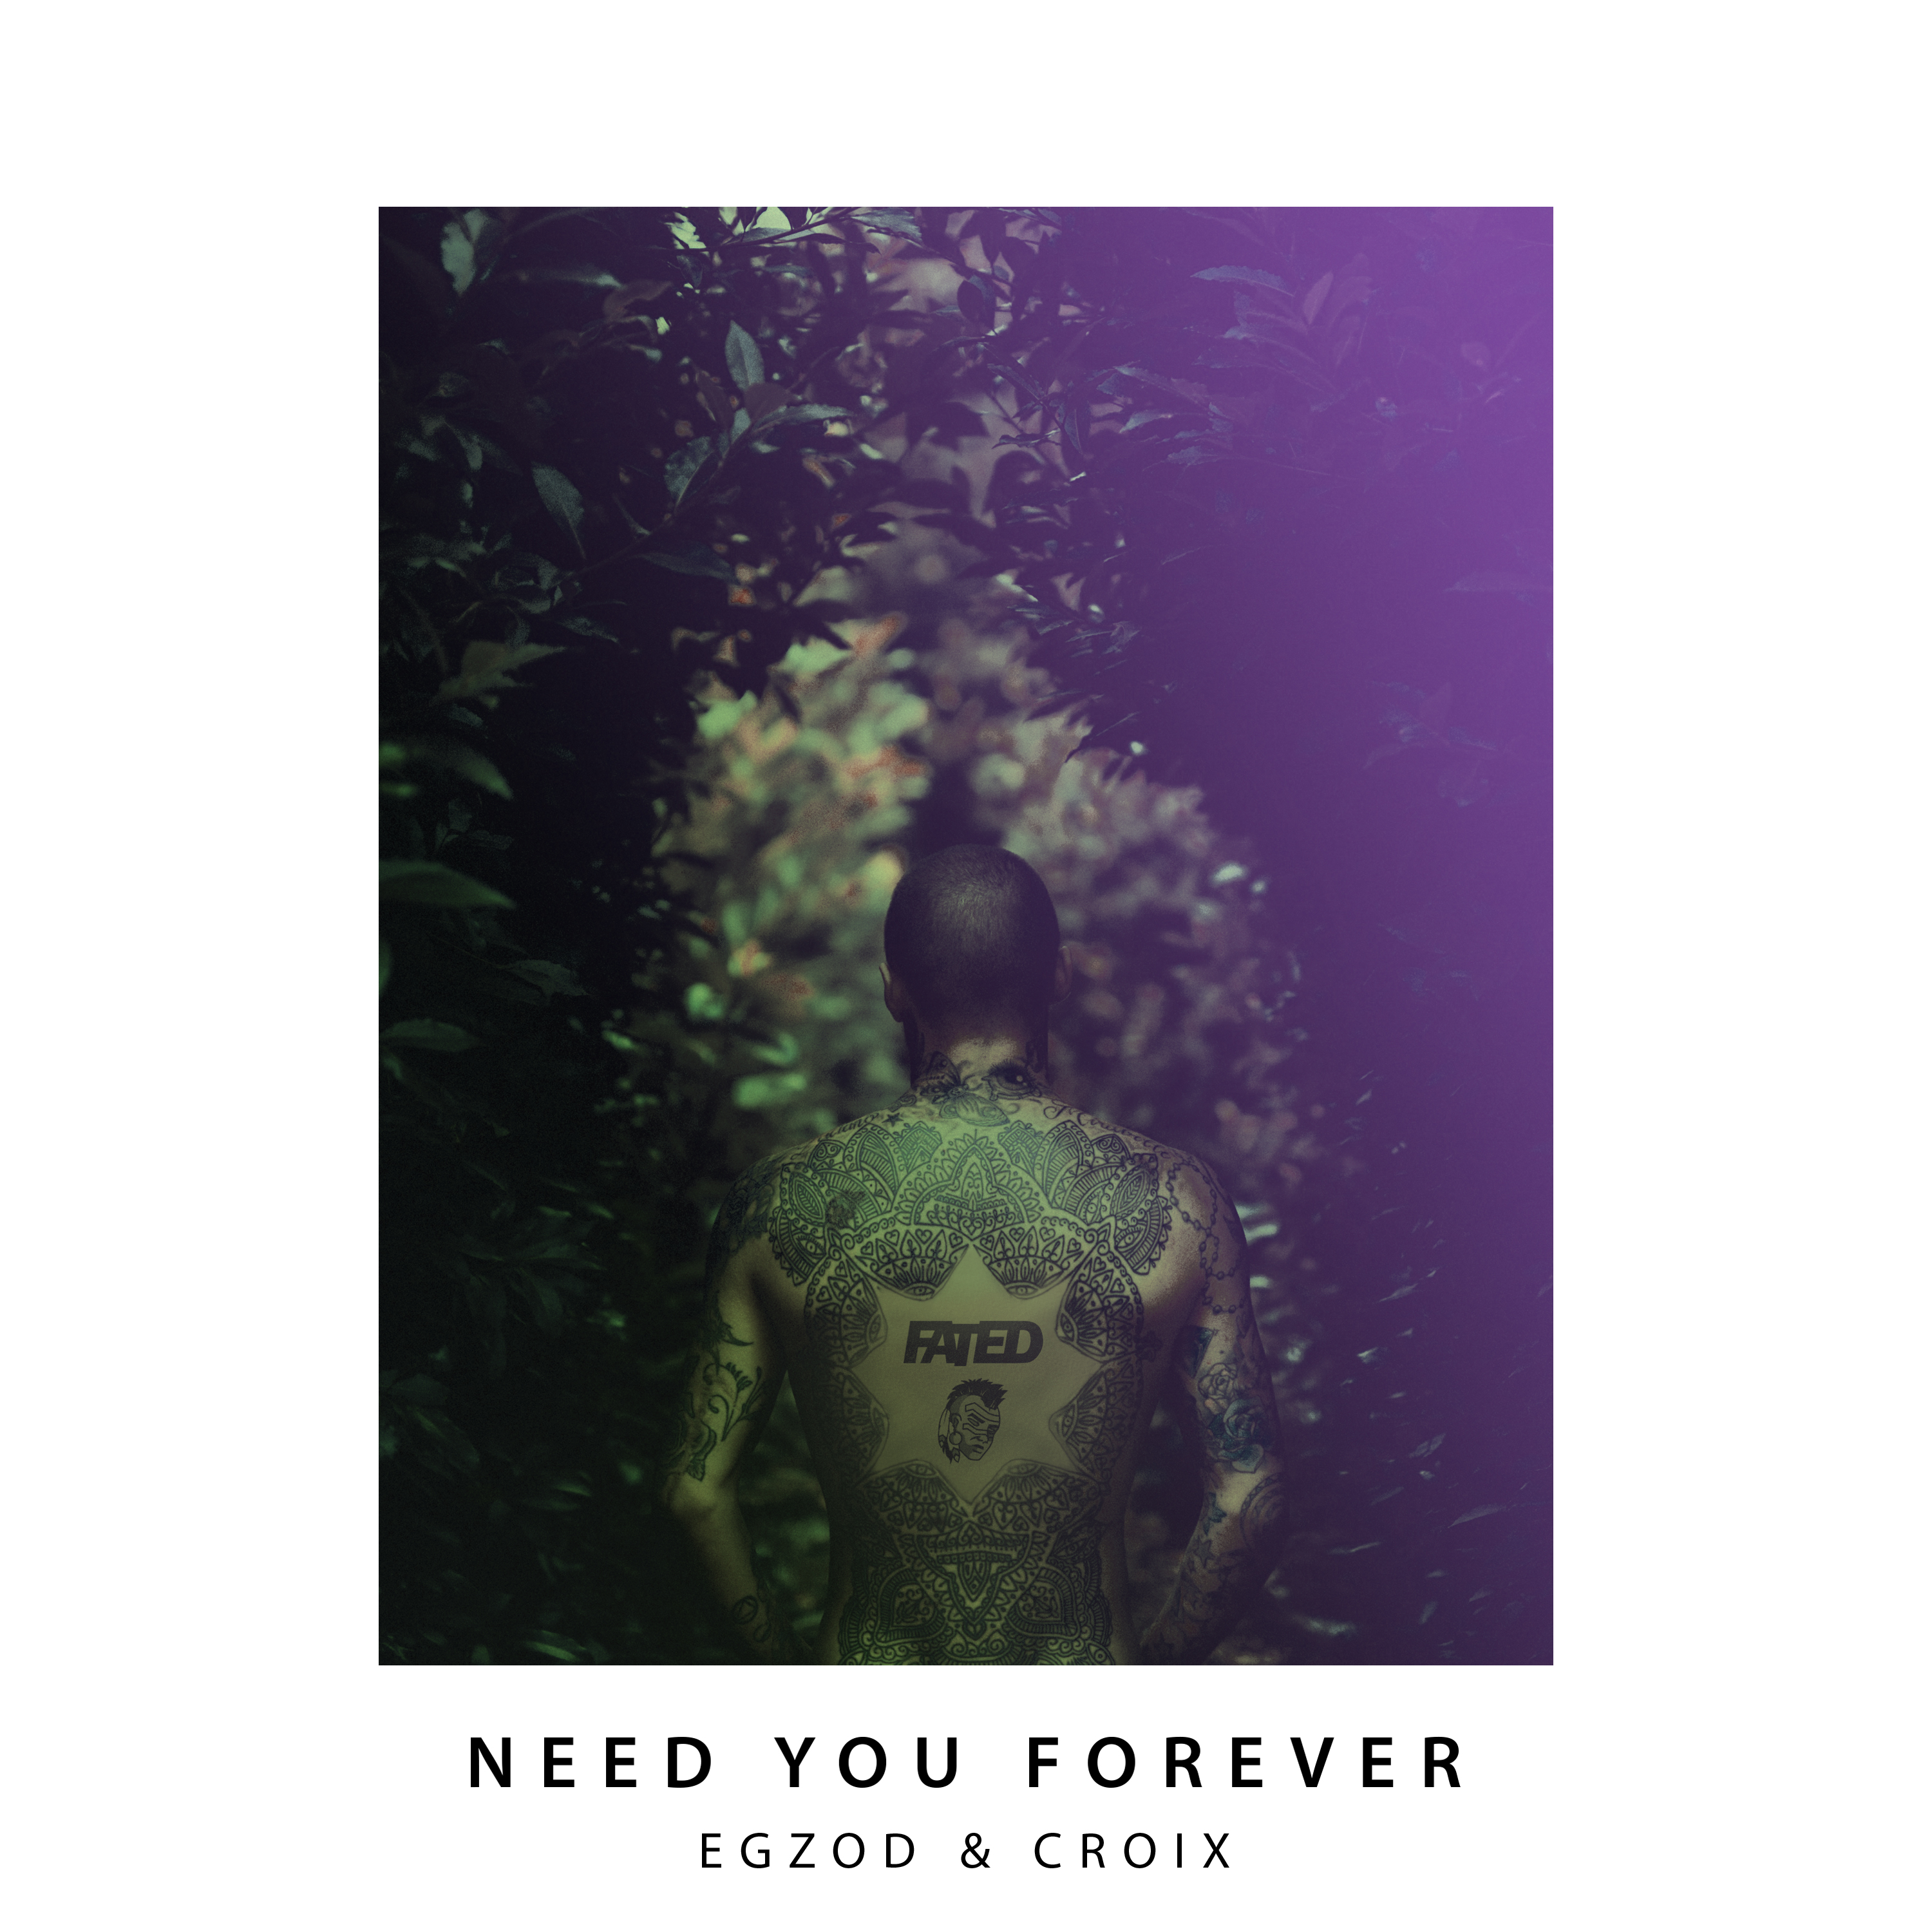 Egzod & Croix’s “Need You Forever” Adds Tribal Feel To Popular Future Bass Vibes